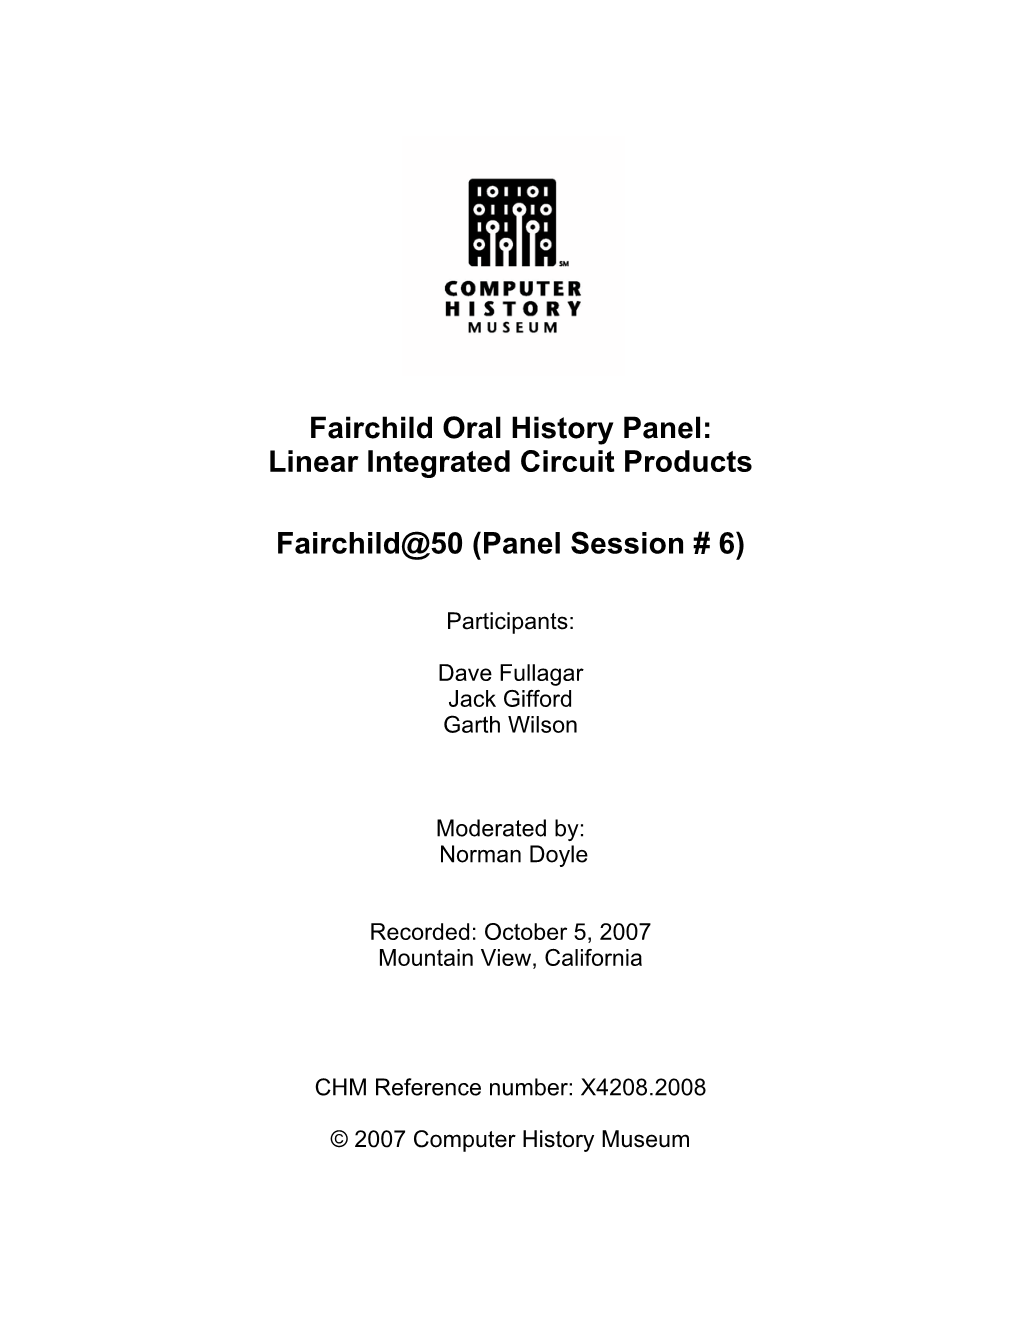 Fairchild Oral History Panel: Linear Integrated Circuit Products